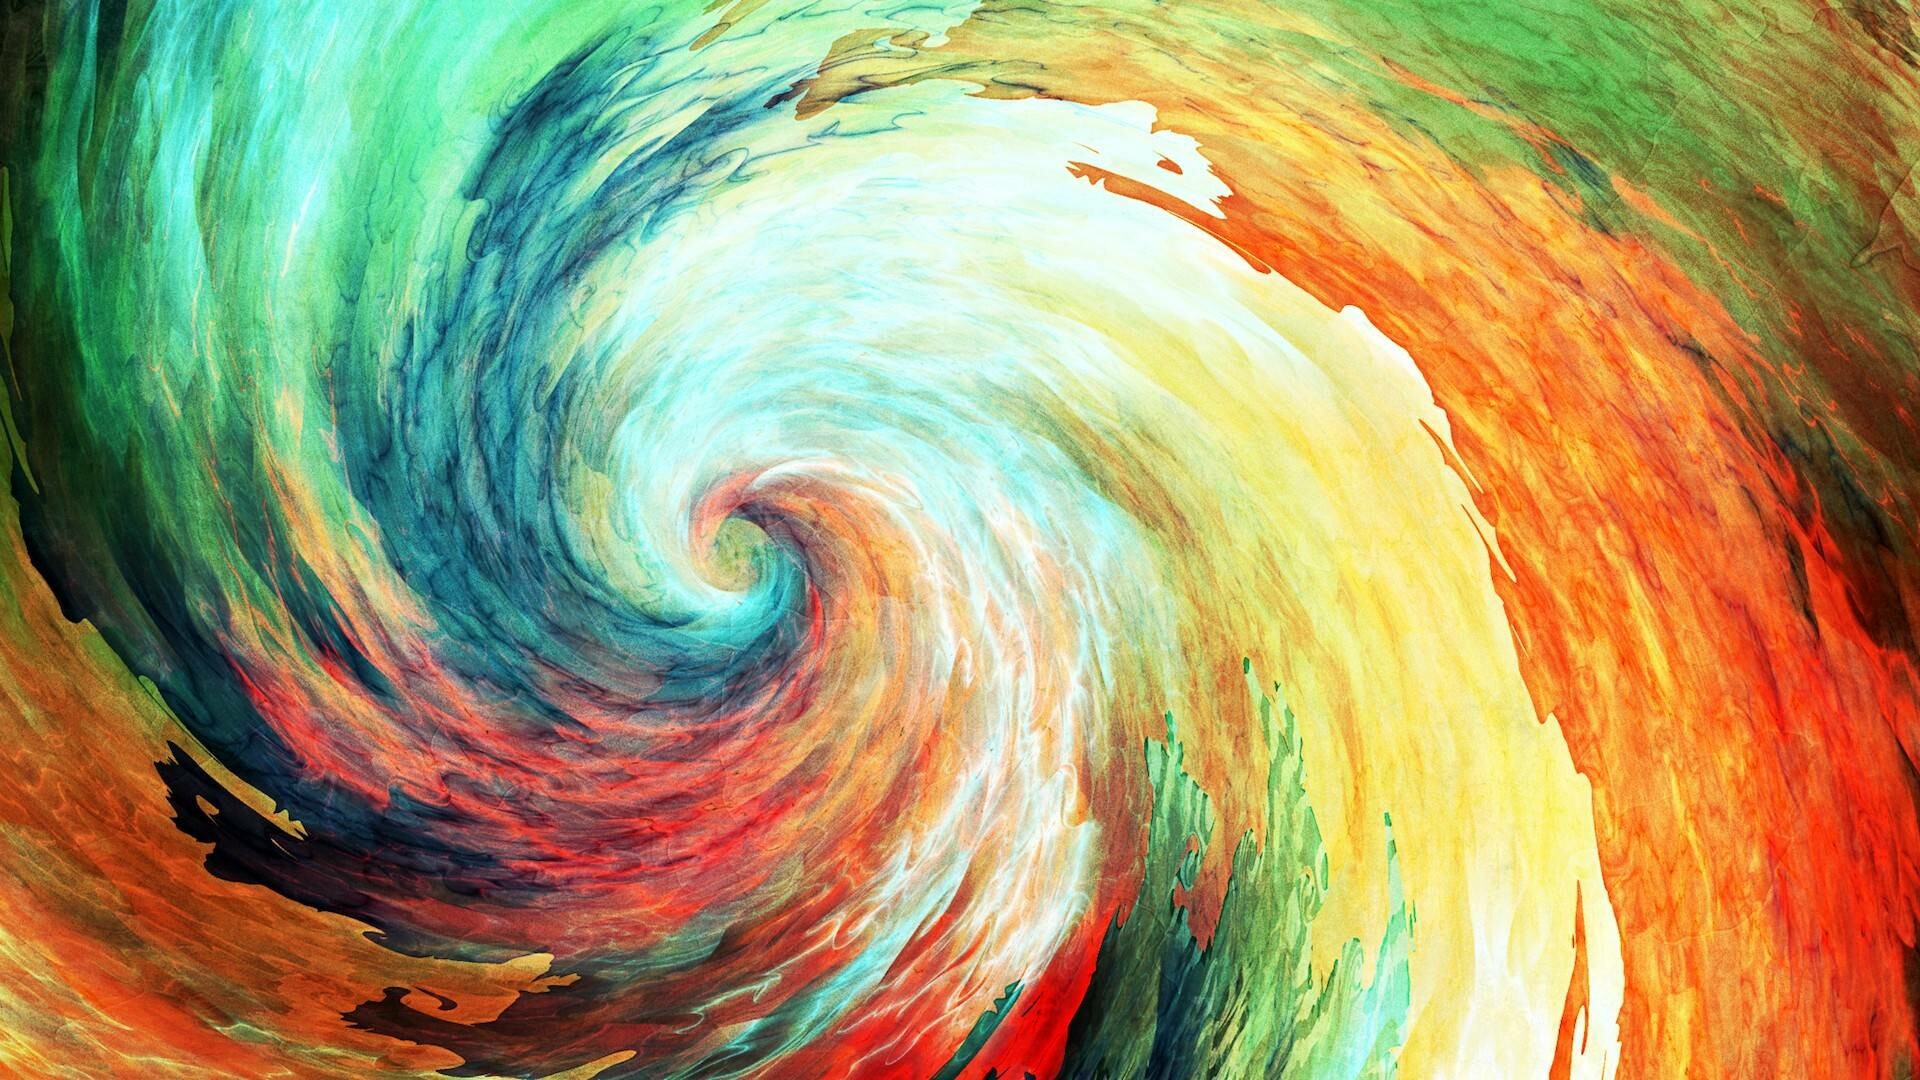 1500+] Abstract Art Wallpapers | Wallpapers.com